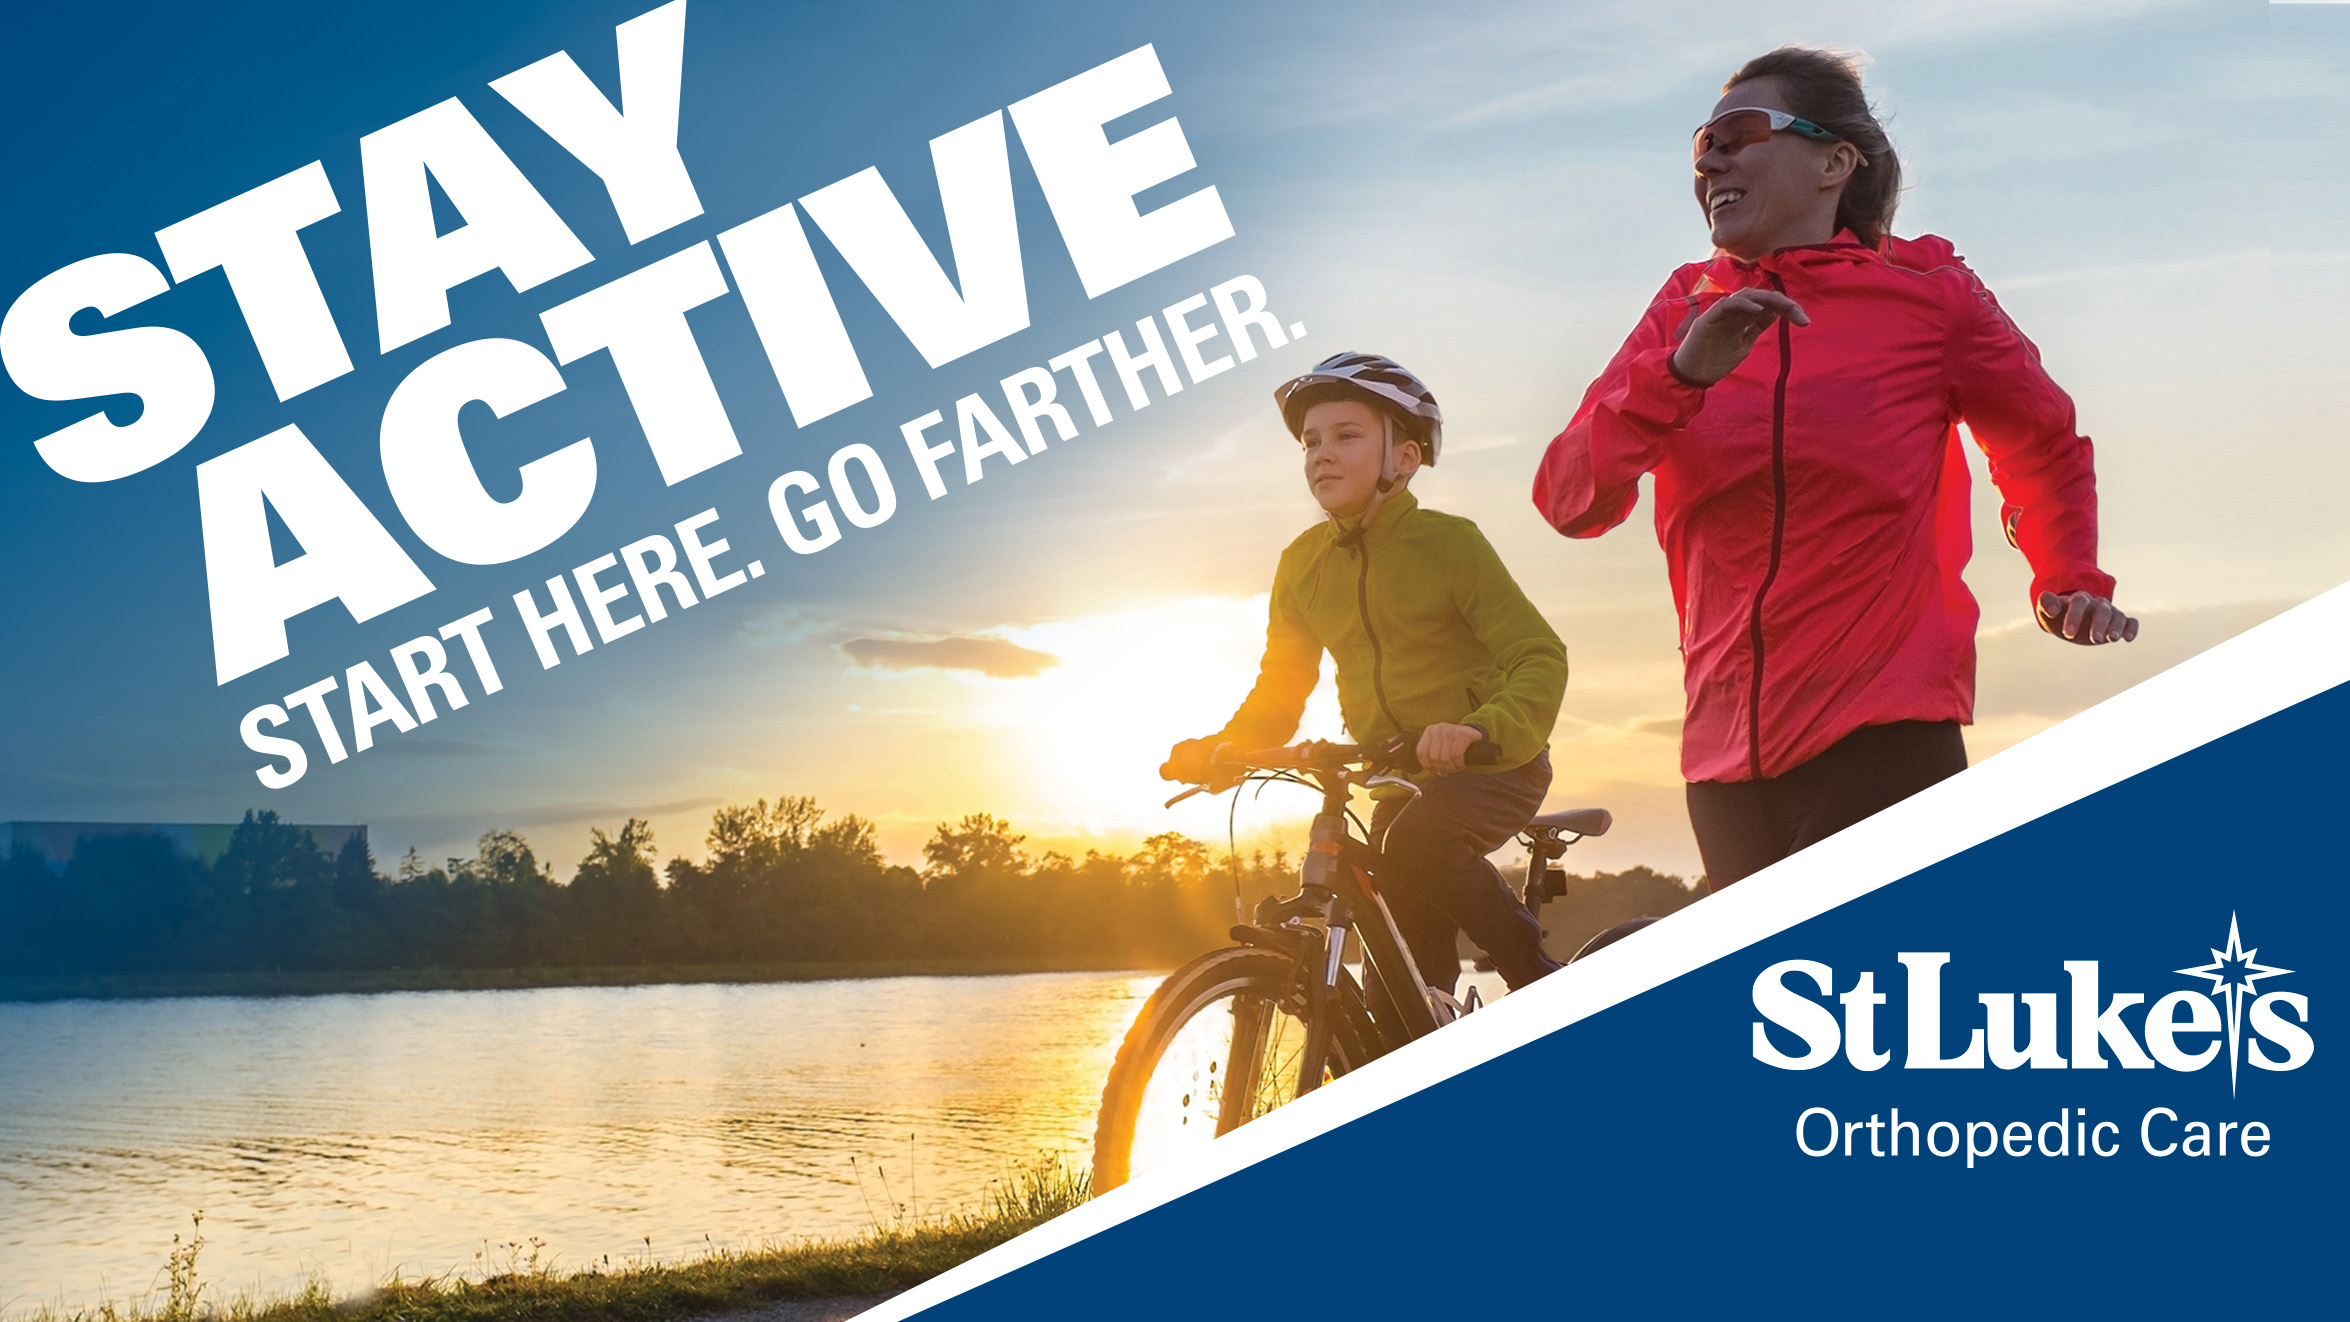 stay active. start here. go farther.